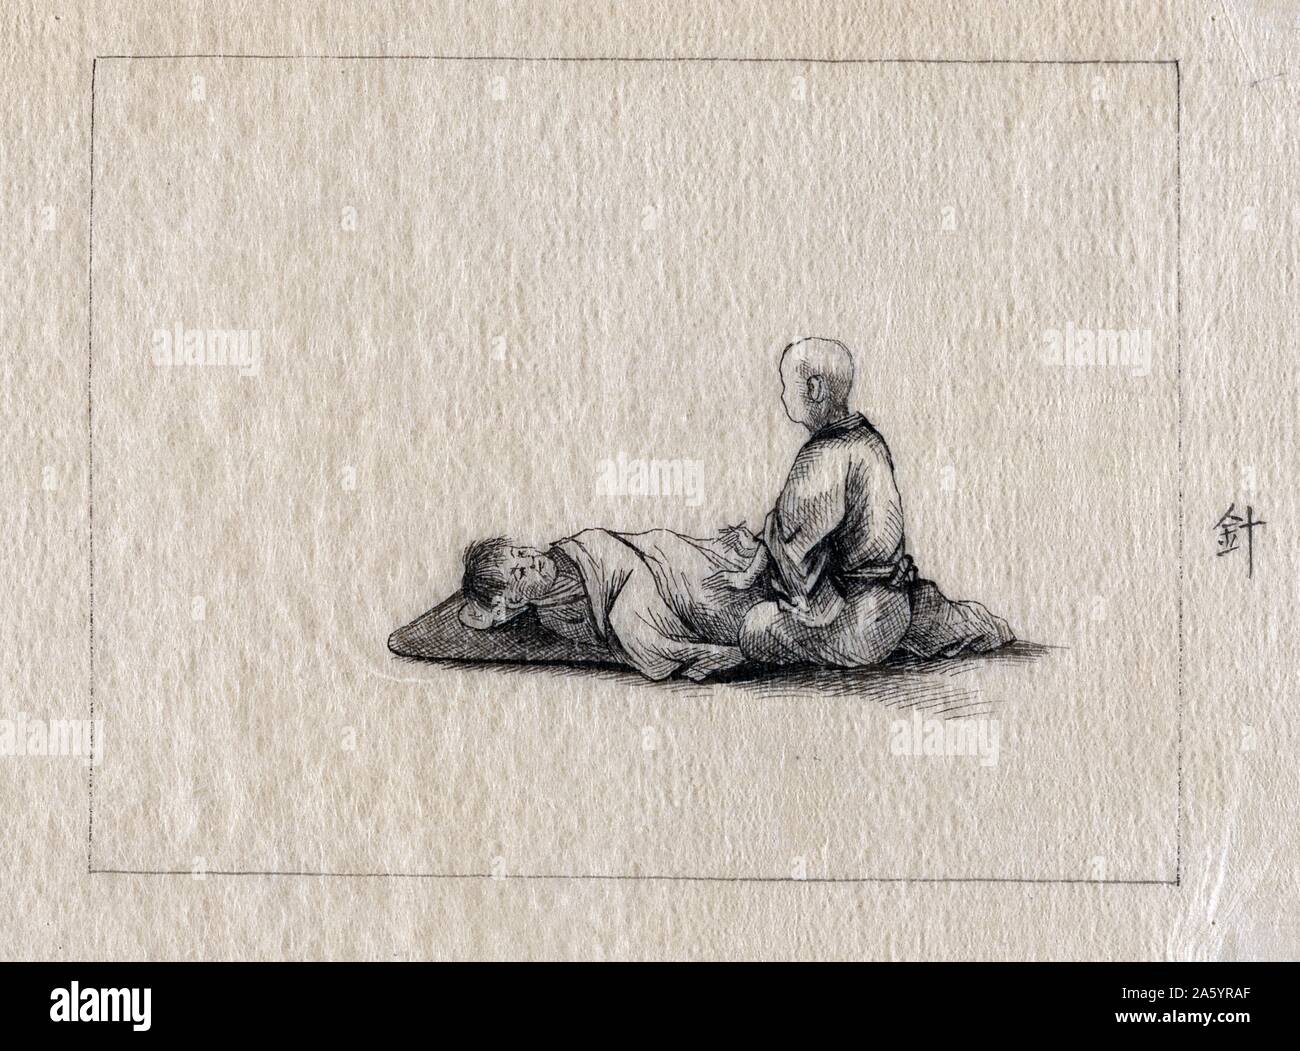 Acupuncturist with a patient. Inscribed in pencil on lower left corner of paper mound : Kano, October 1878. From the 'Medicine' series'. Stock Photo